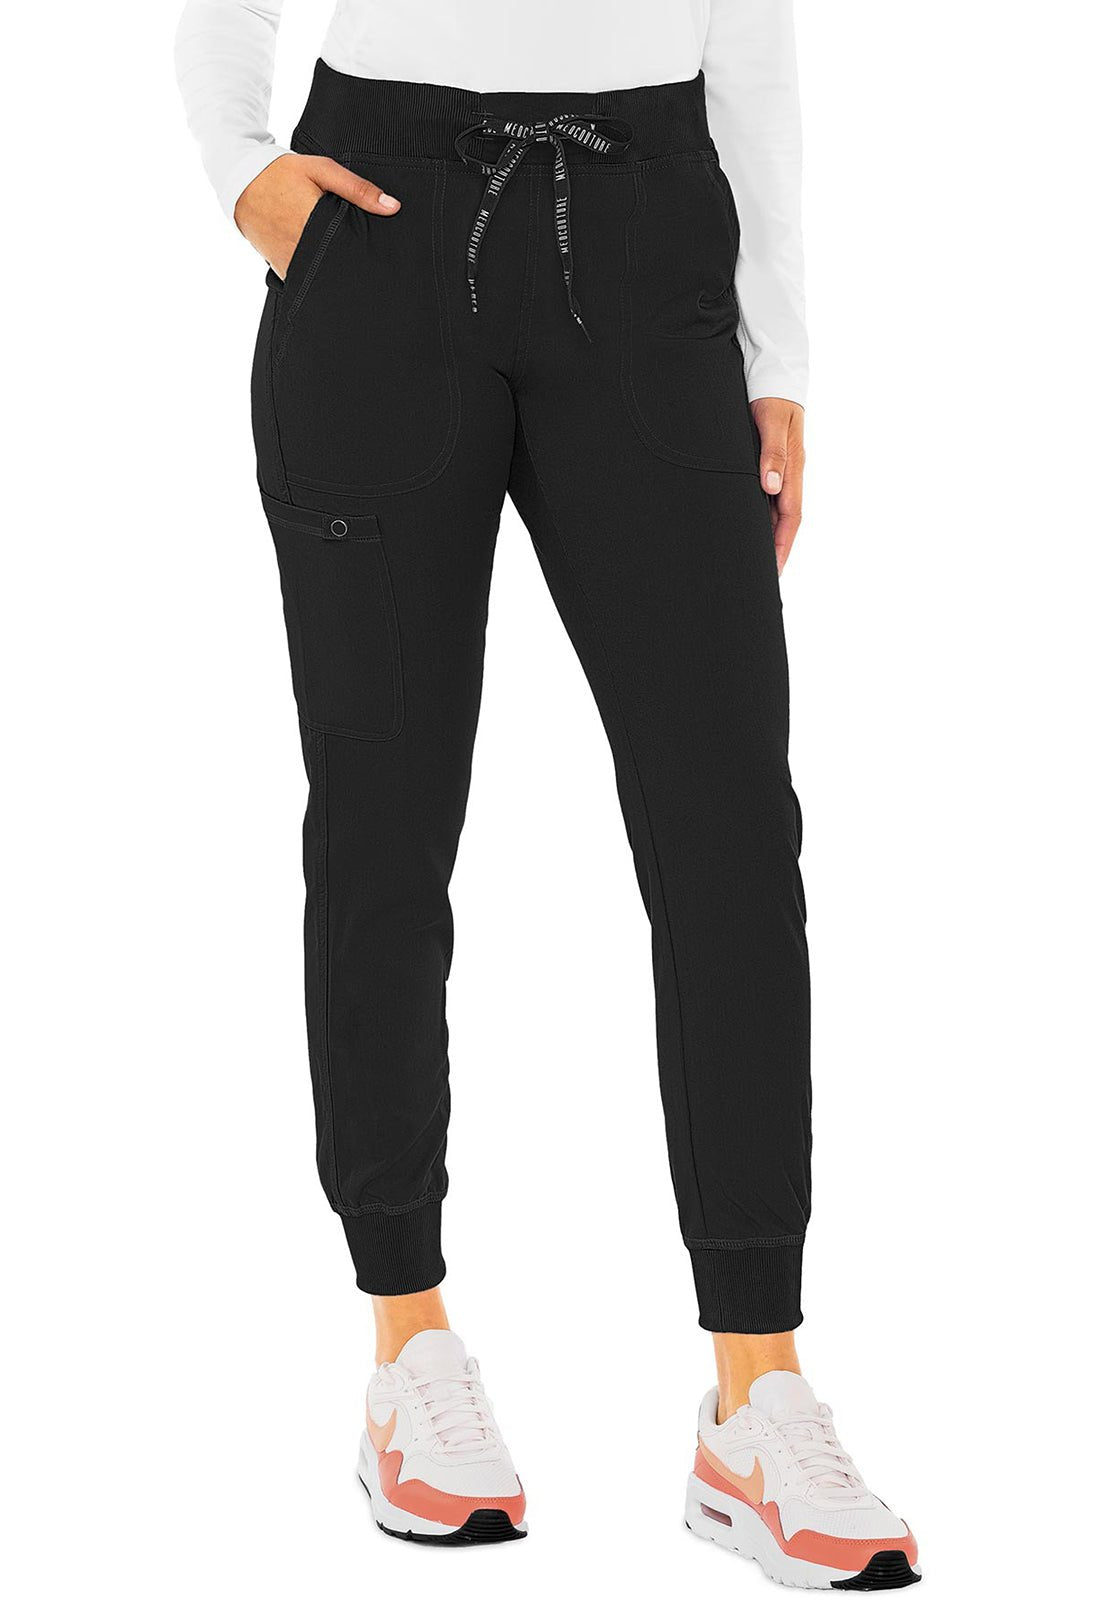 Med Couture Touch Jogger Yoga Scrub Pant MC7710 in Black, Navy, Pewter, Royal - Scrubs Select